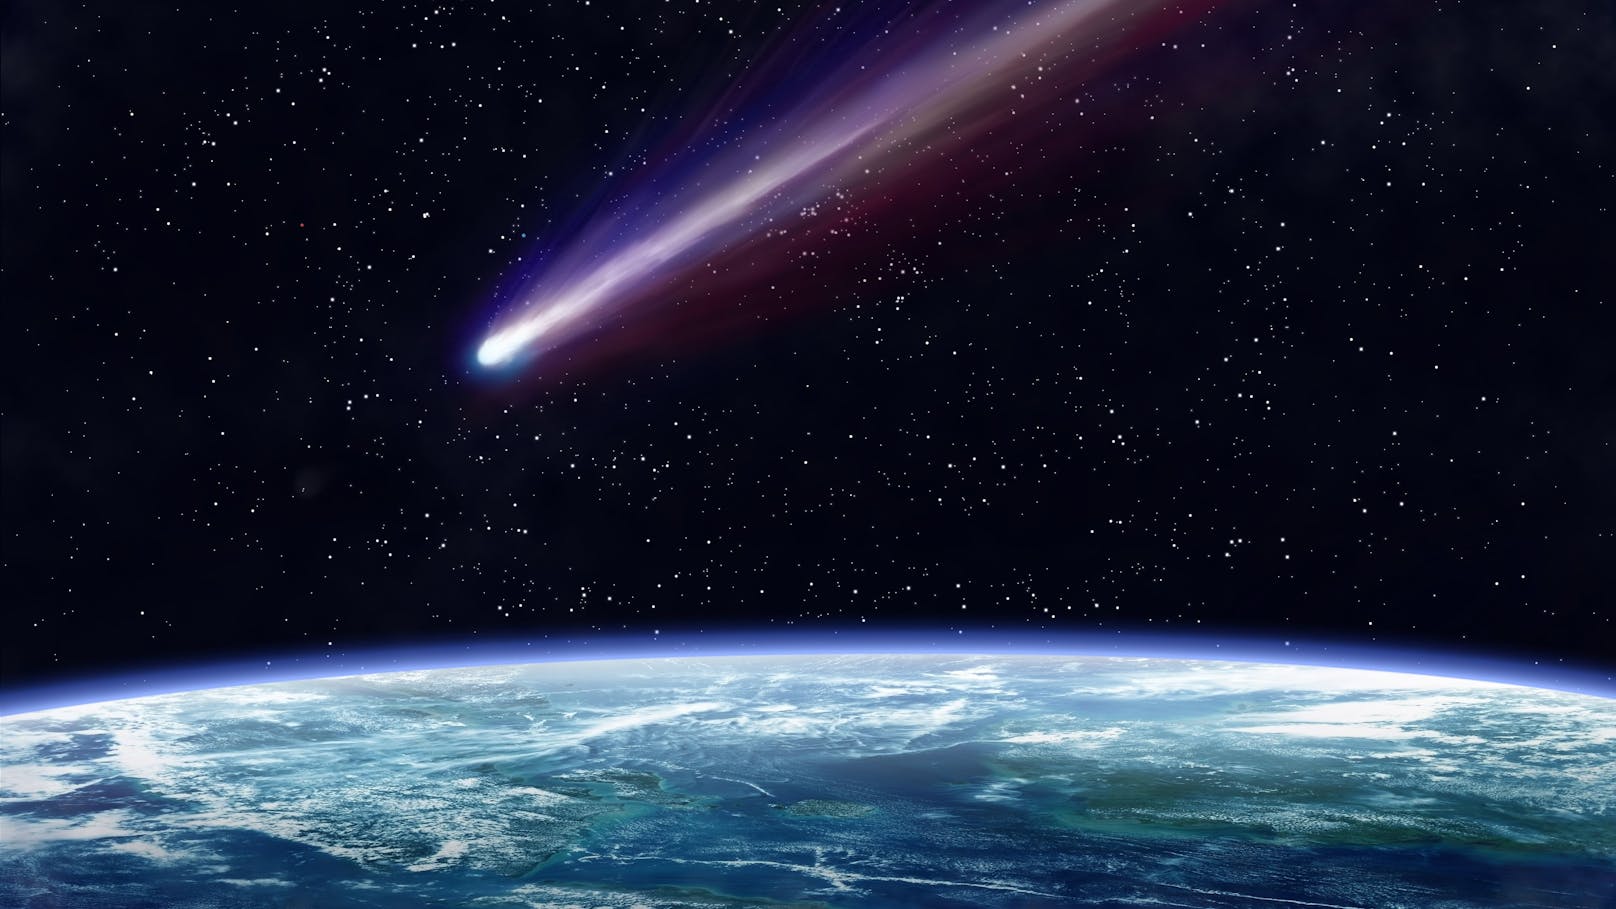 Illustration of a comet flying through space close to the earth